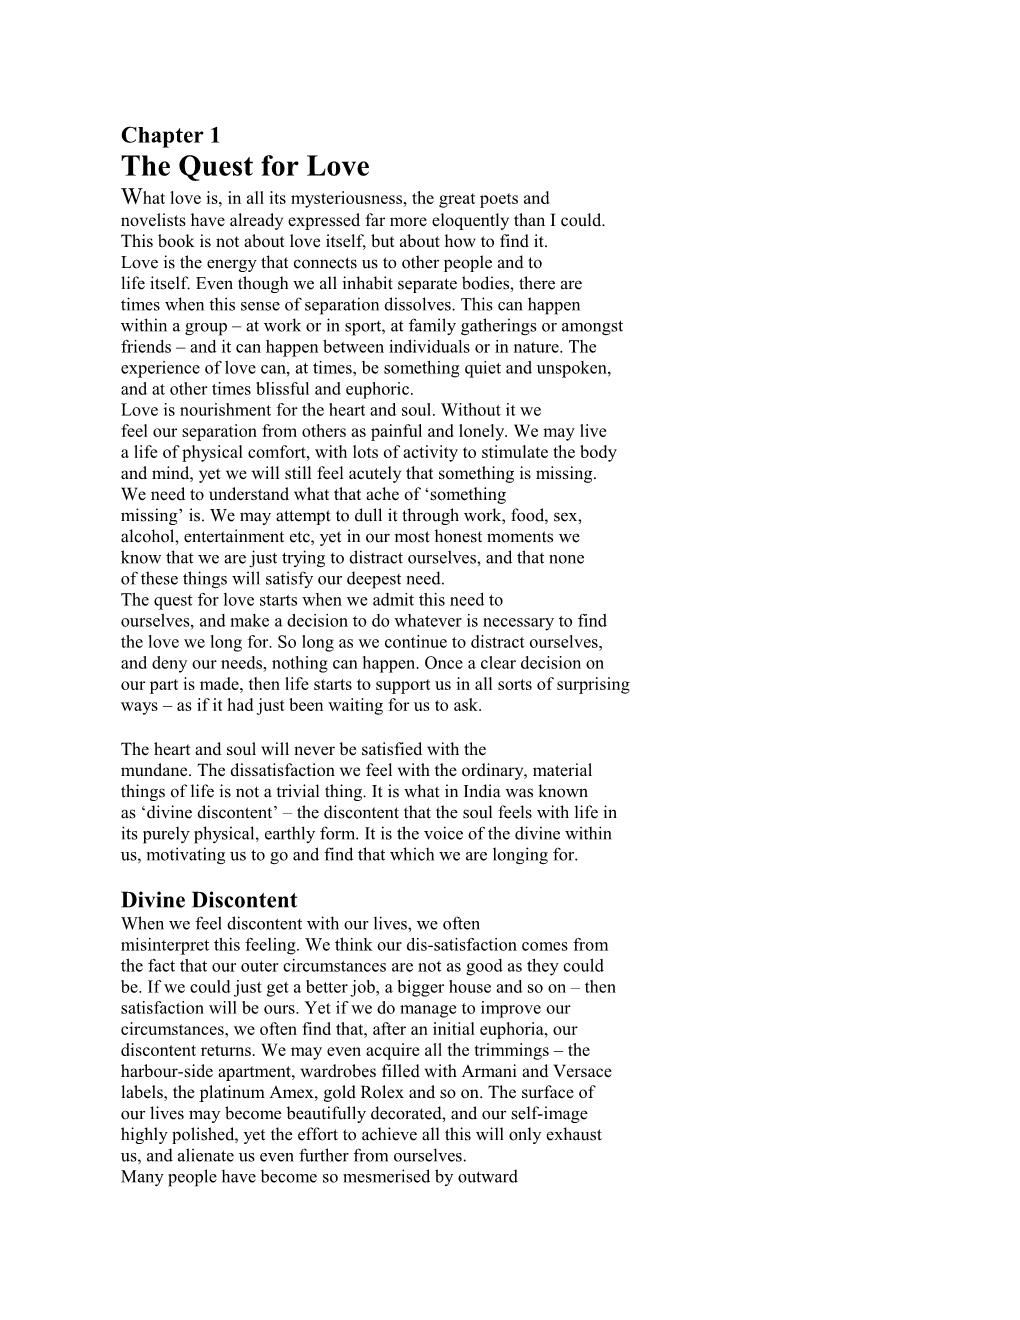 The Quest for Love